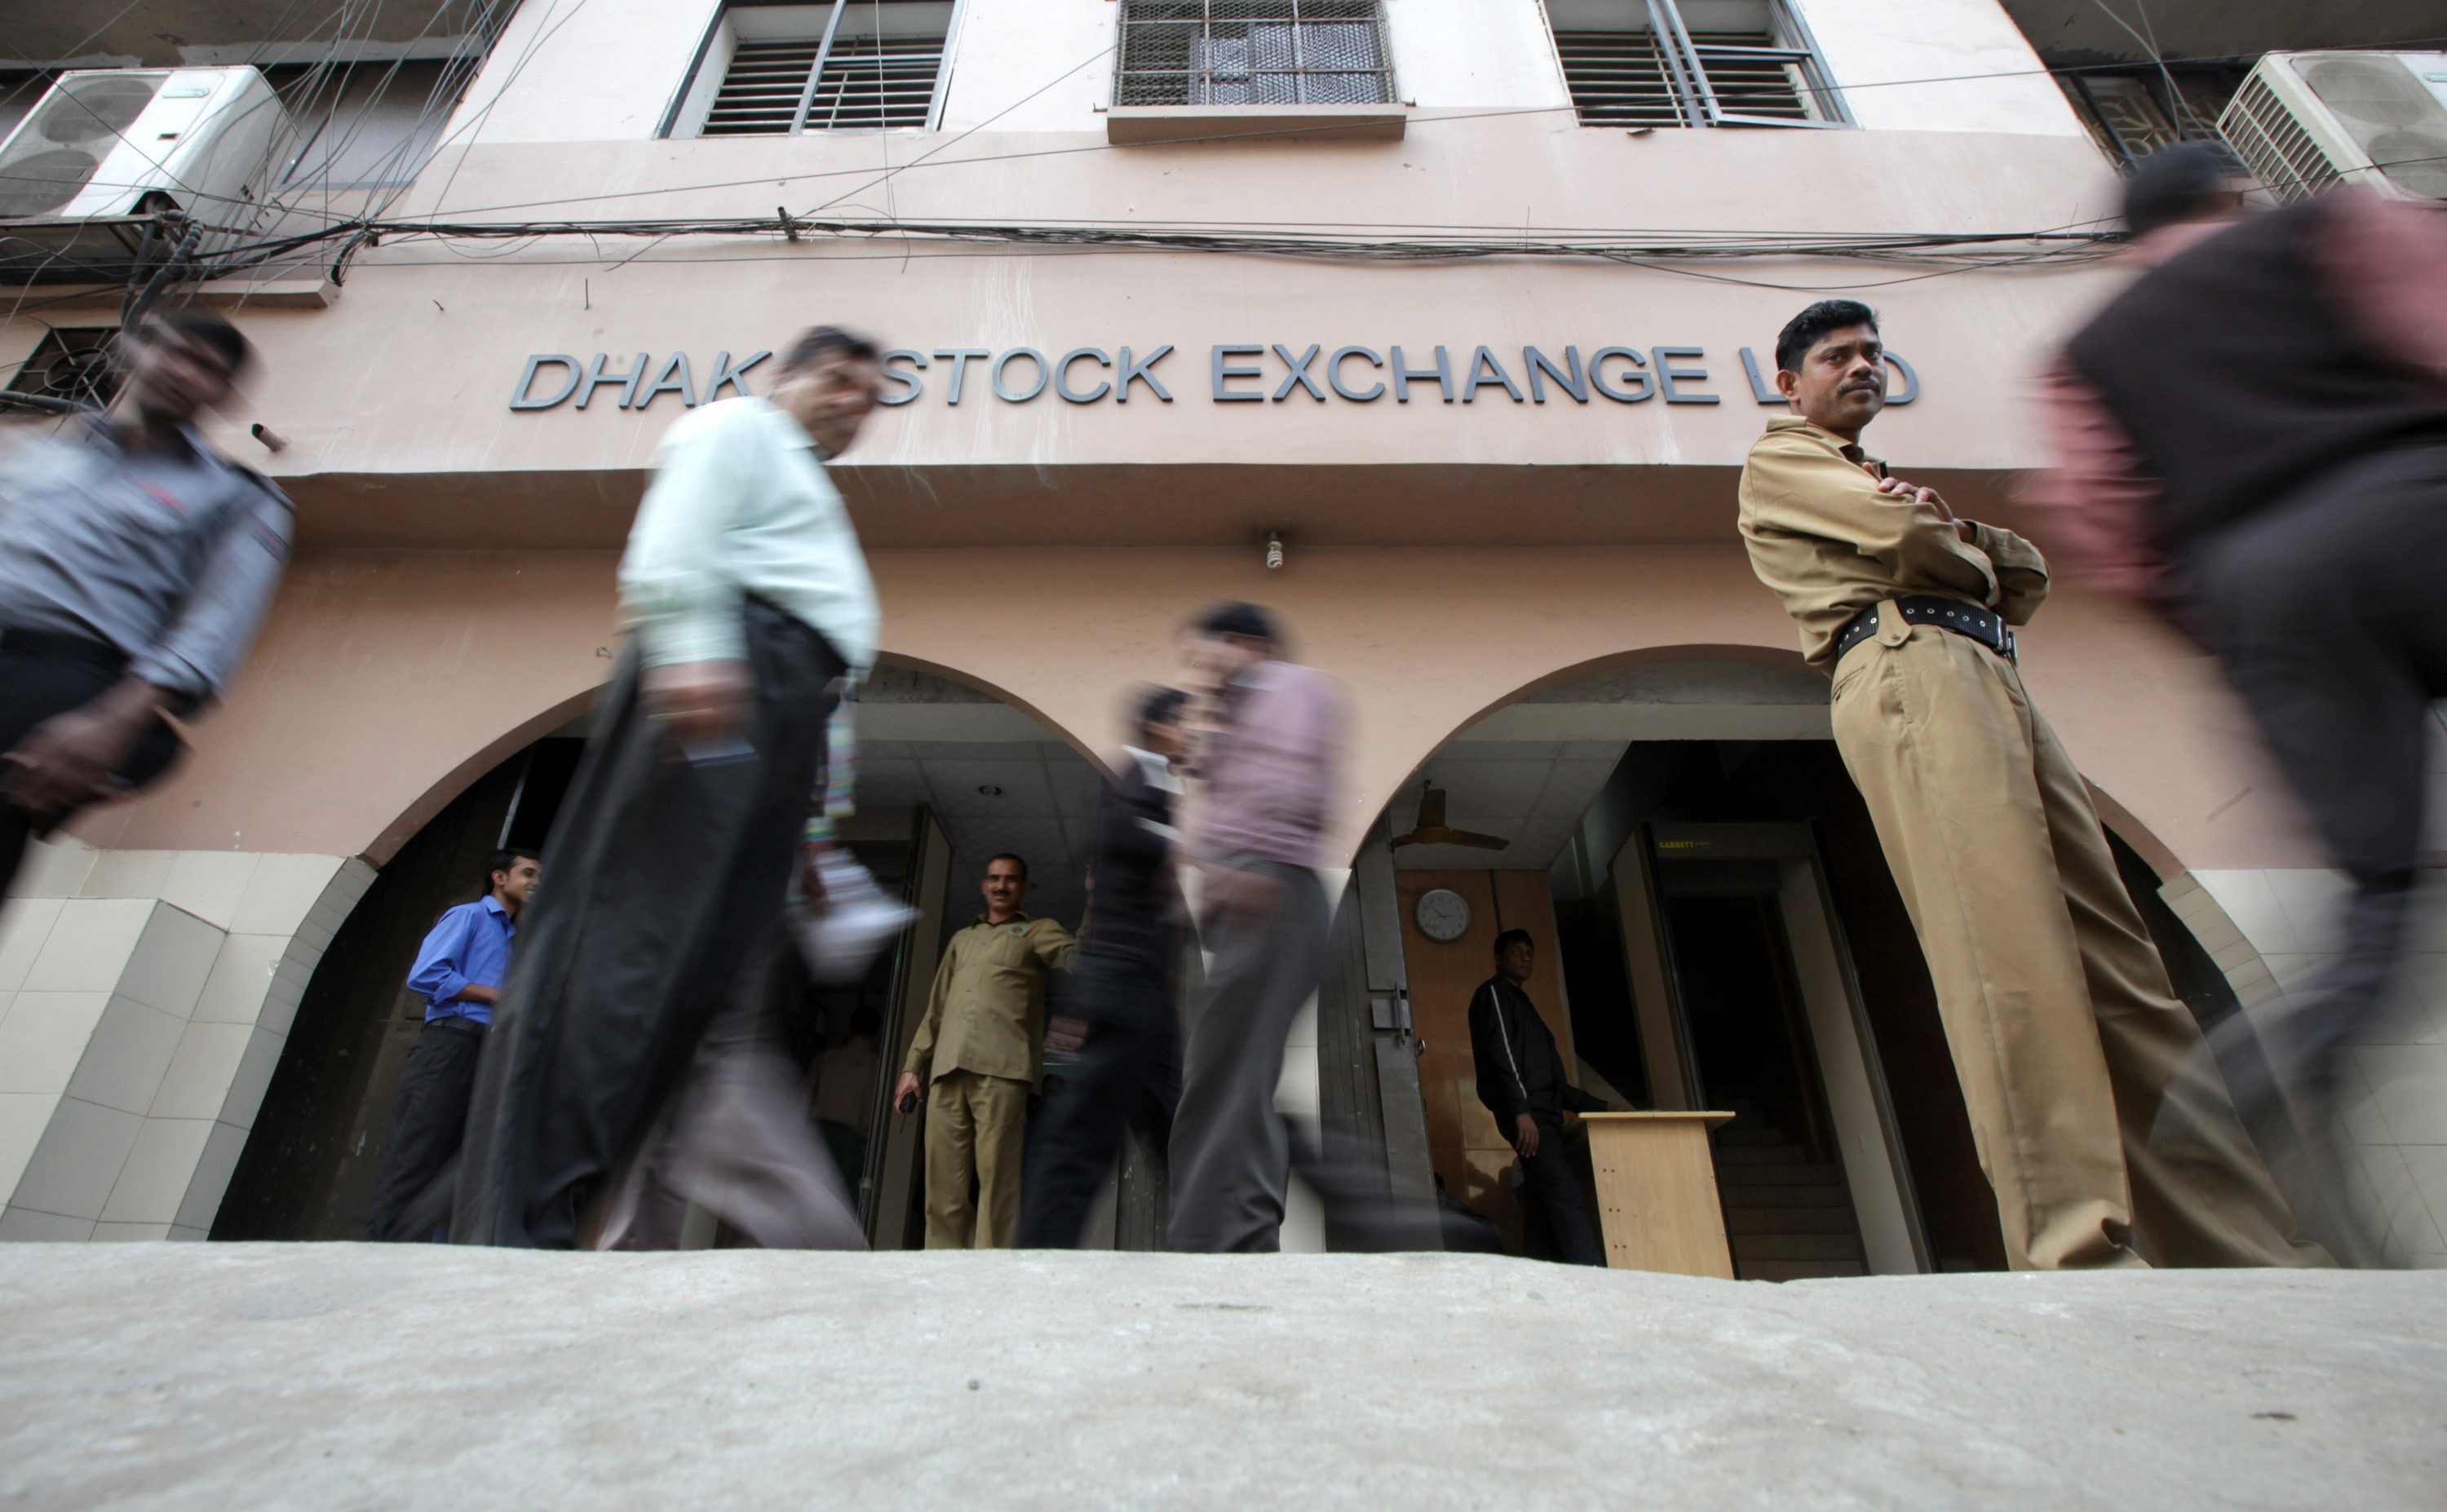 Dhaka bourse looks to close stake sale to Chinese consortium by April end